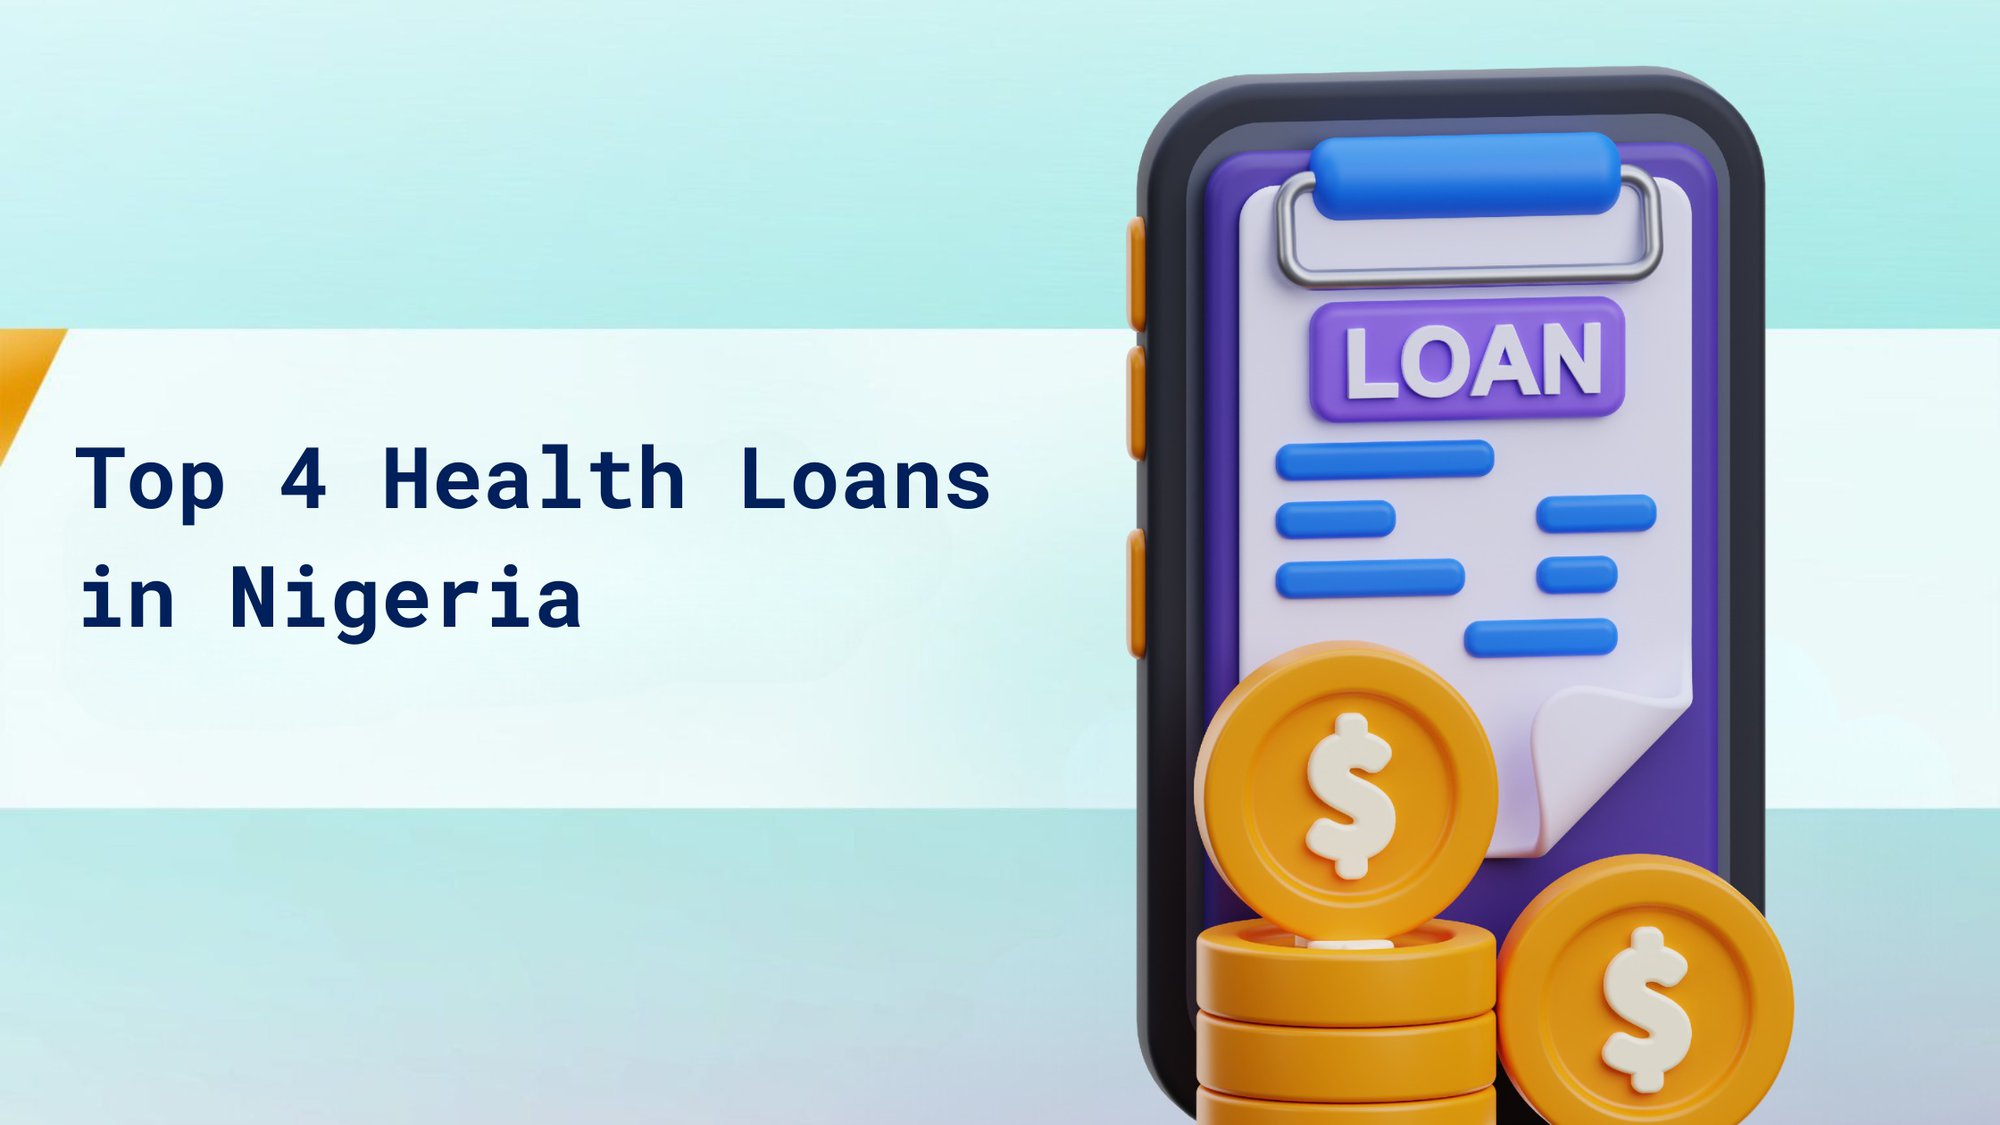 Top 4 Health Loans in Nigeria cover